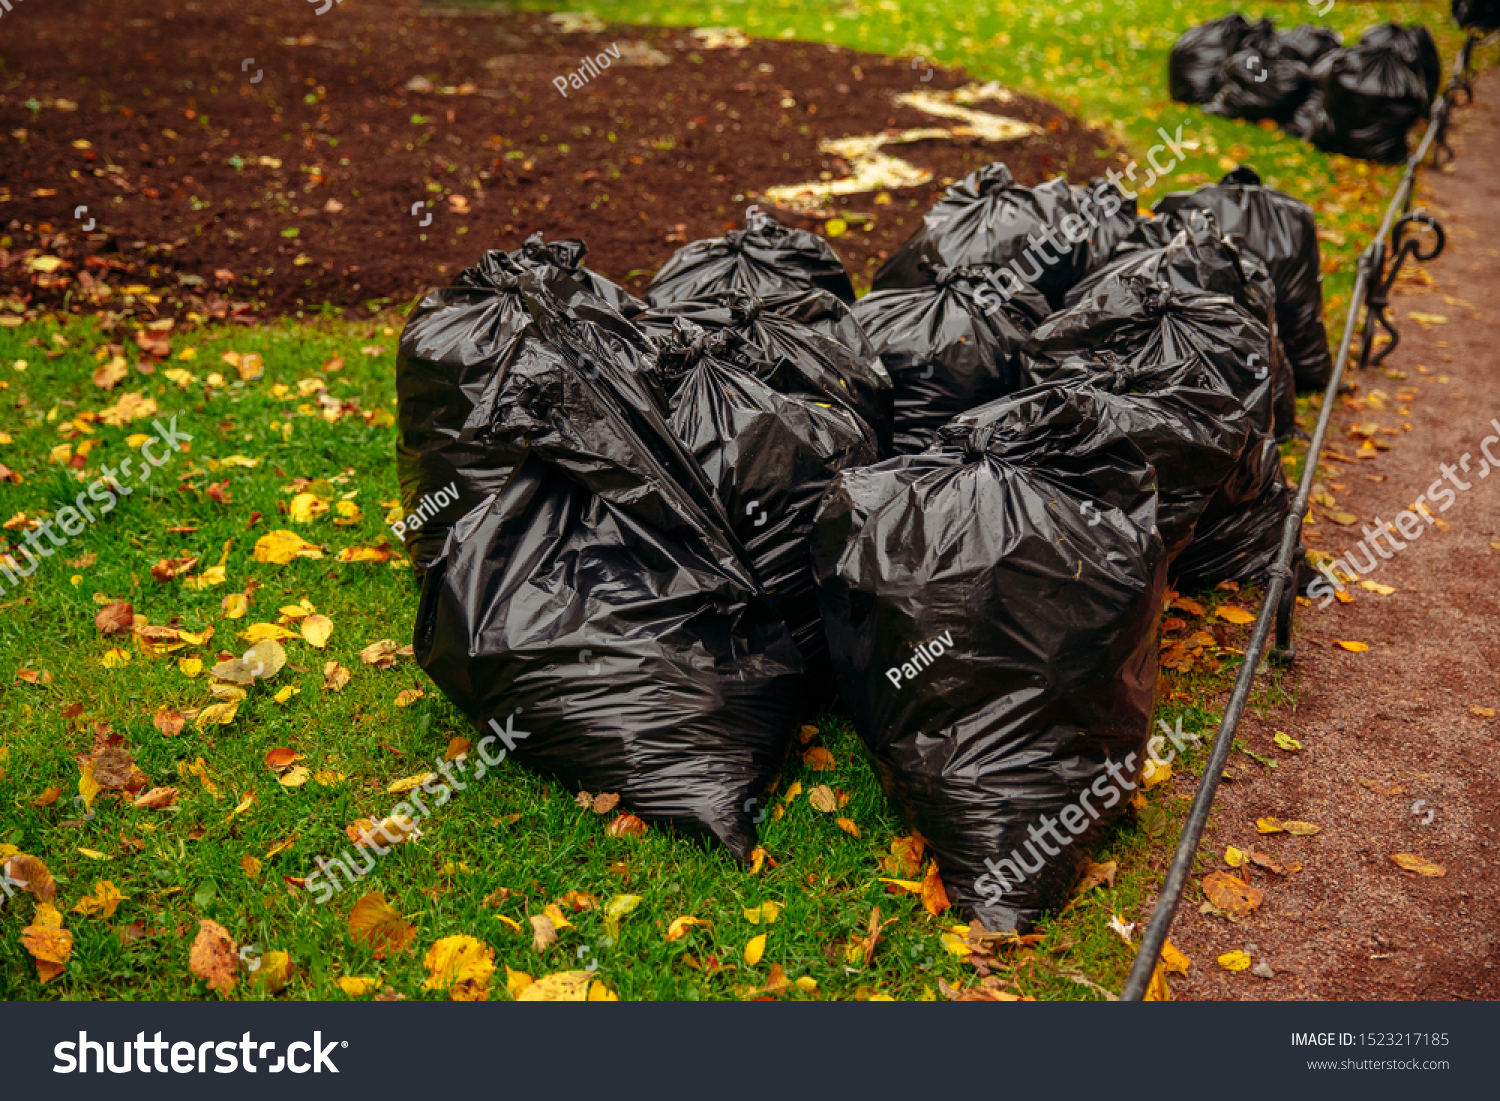 Download Two Biodegradable Trash Bags Full Yellow Objects Stock Image 1523217185 PSD Mockup Templates